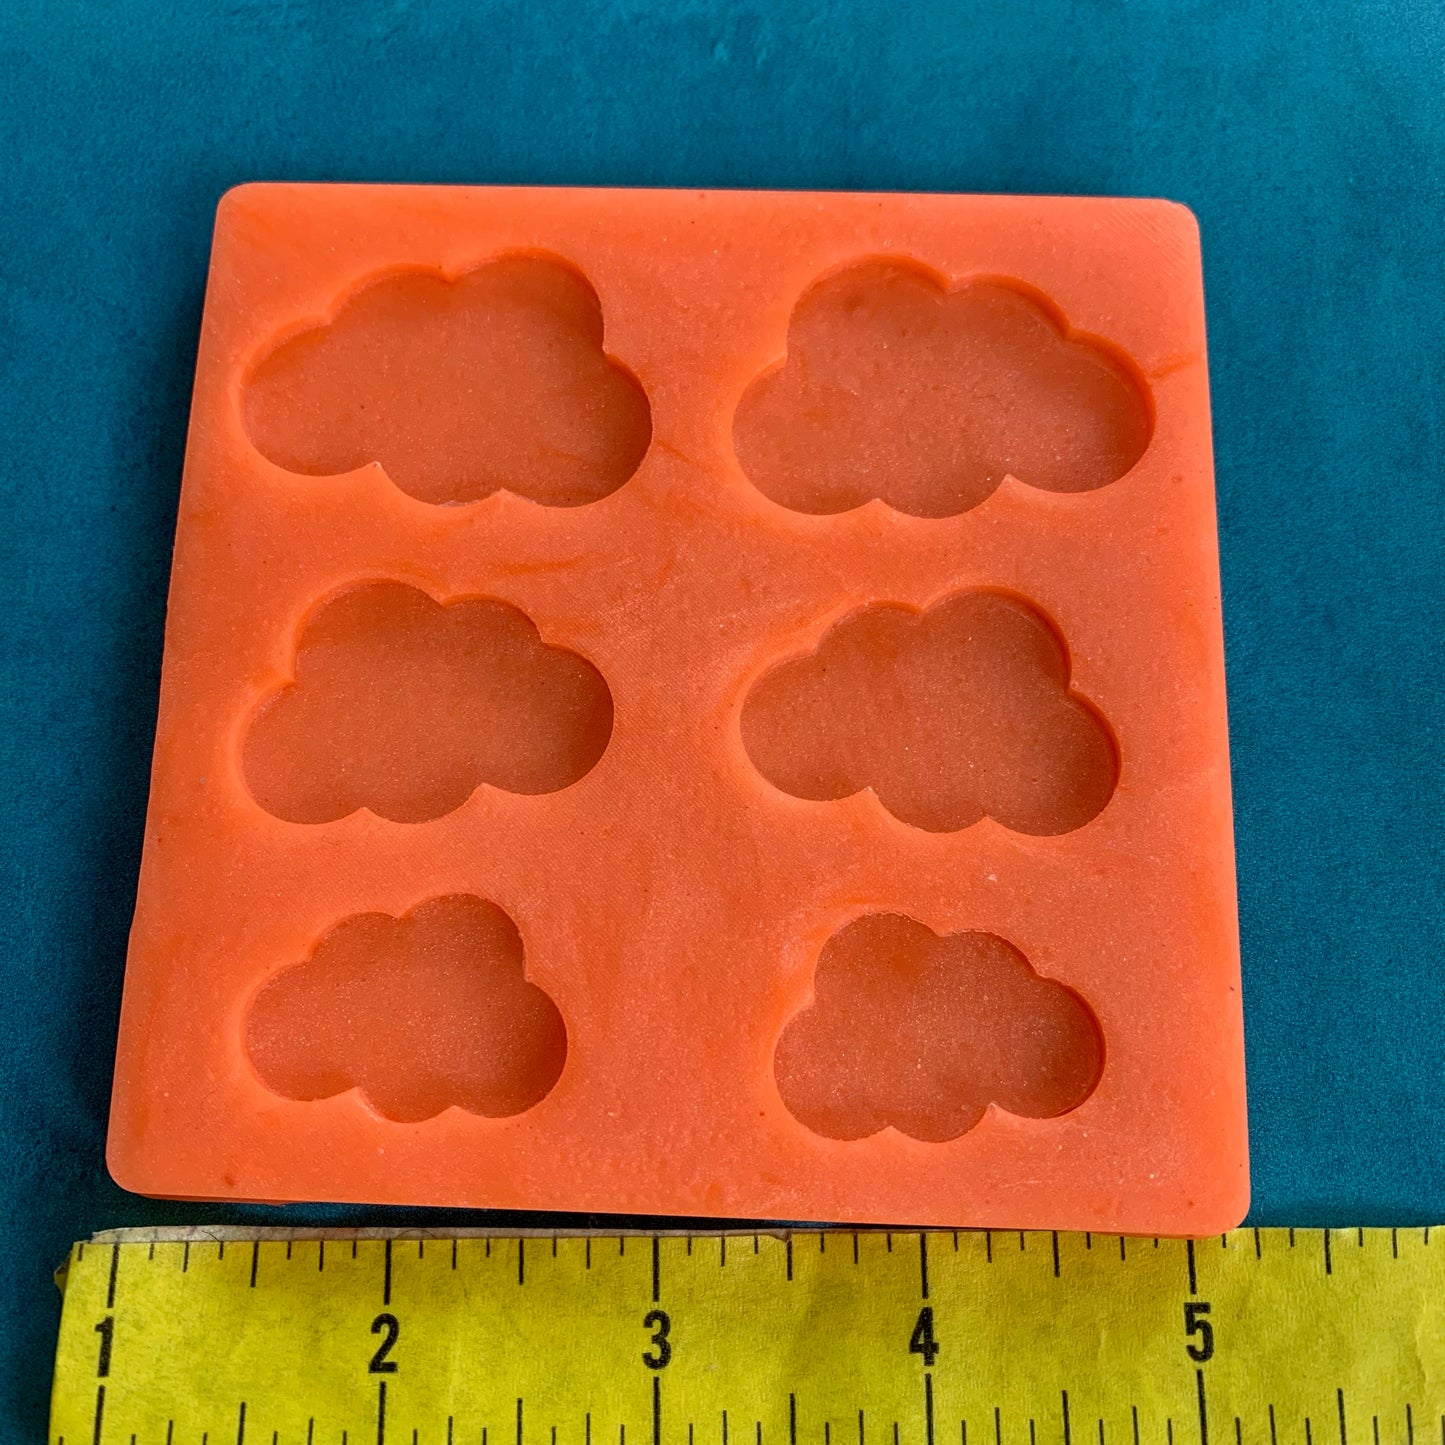 Cloudy Days Clouds Silicone Earring Jewelry Mold polymer clay tools and supplies ideas